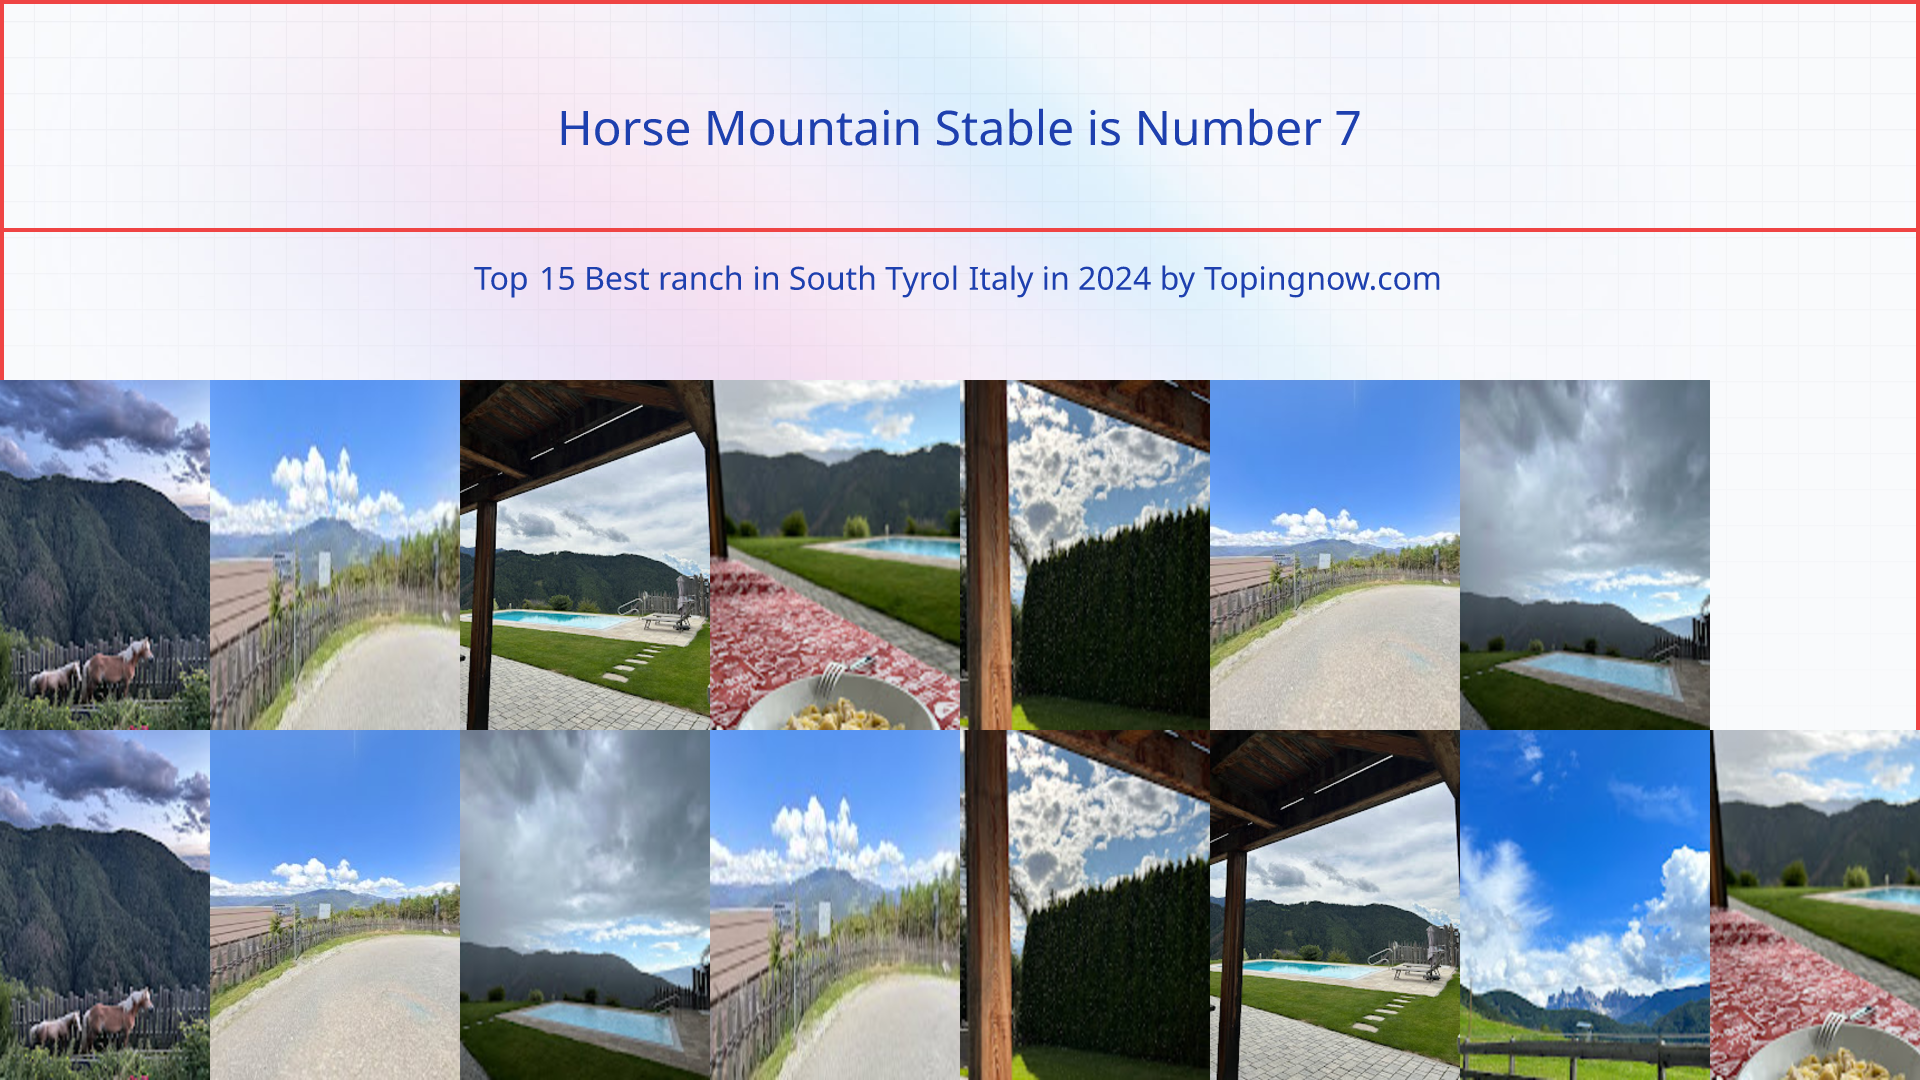 Horse Mountain Stable: Top 15 Best ranch in South Tyrol Italy in 2024